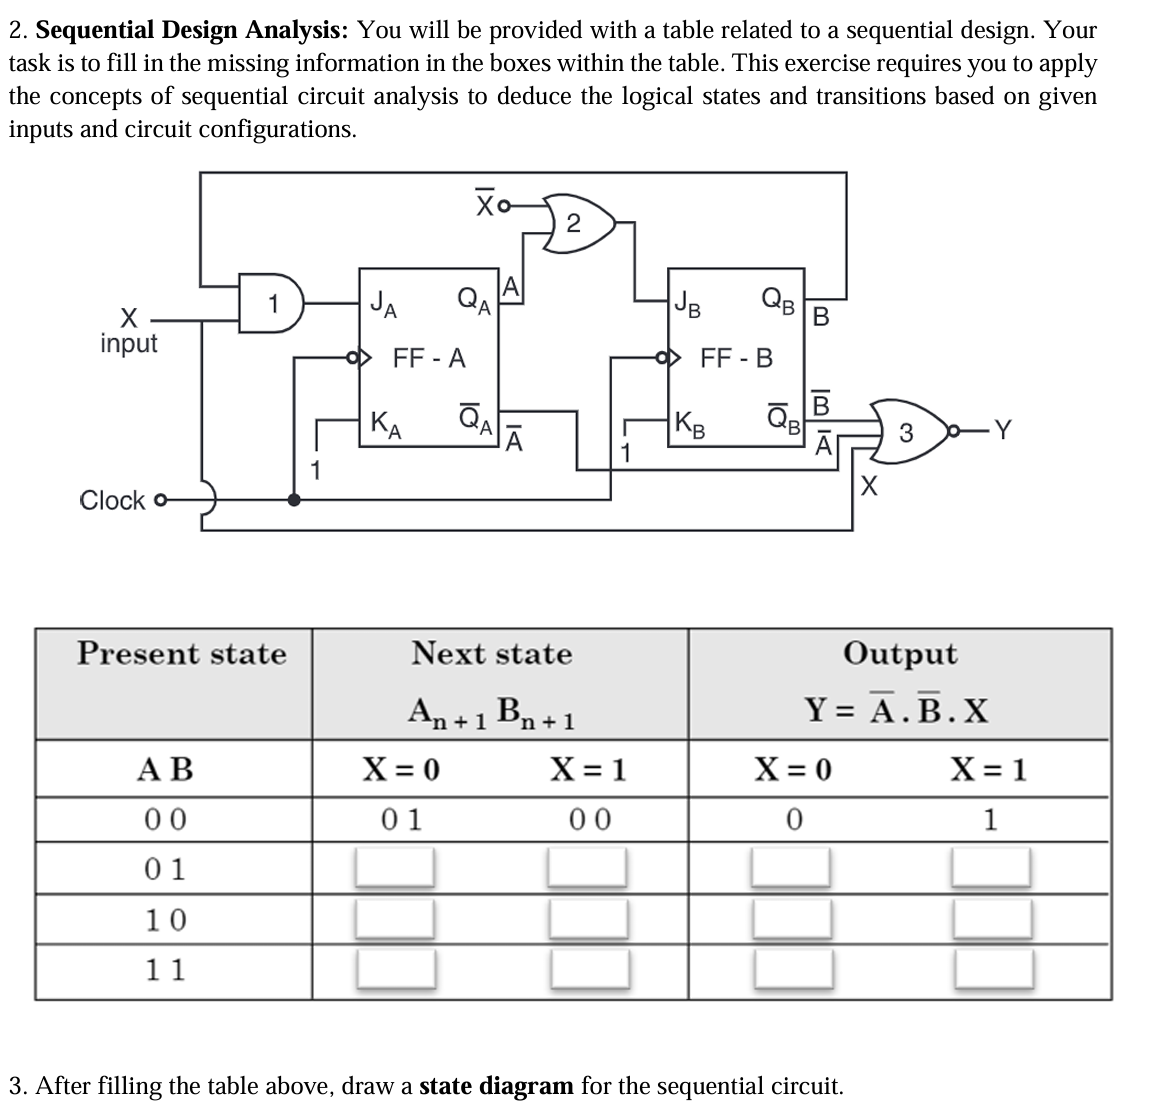 2. Sequential Design Analysis: You will be provided with a table related to a sequential design. Your
task is to fill in the missing information in the boxes within the table. This exercise requires you to apply
the concepts of sequential circuit analysis to deduce the logical states and transitions based on given
inputs and circuit configurations.
Хо
2
JA
QA
JB
QB
X
input
B
OFF-A
FF - B
B
KA
QA
KB
QBH
Y
1
1
Clock -
Present state
Next state
Output
An+1 Bn+1
Y = A.B.X
AB
X=0
X = 1
X=0
X = 1
00
01
00
0
1
01
10
11
3. After filling the table above, draw a state diagram for the sequential circuit.